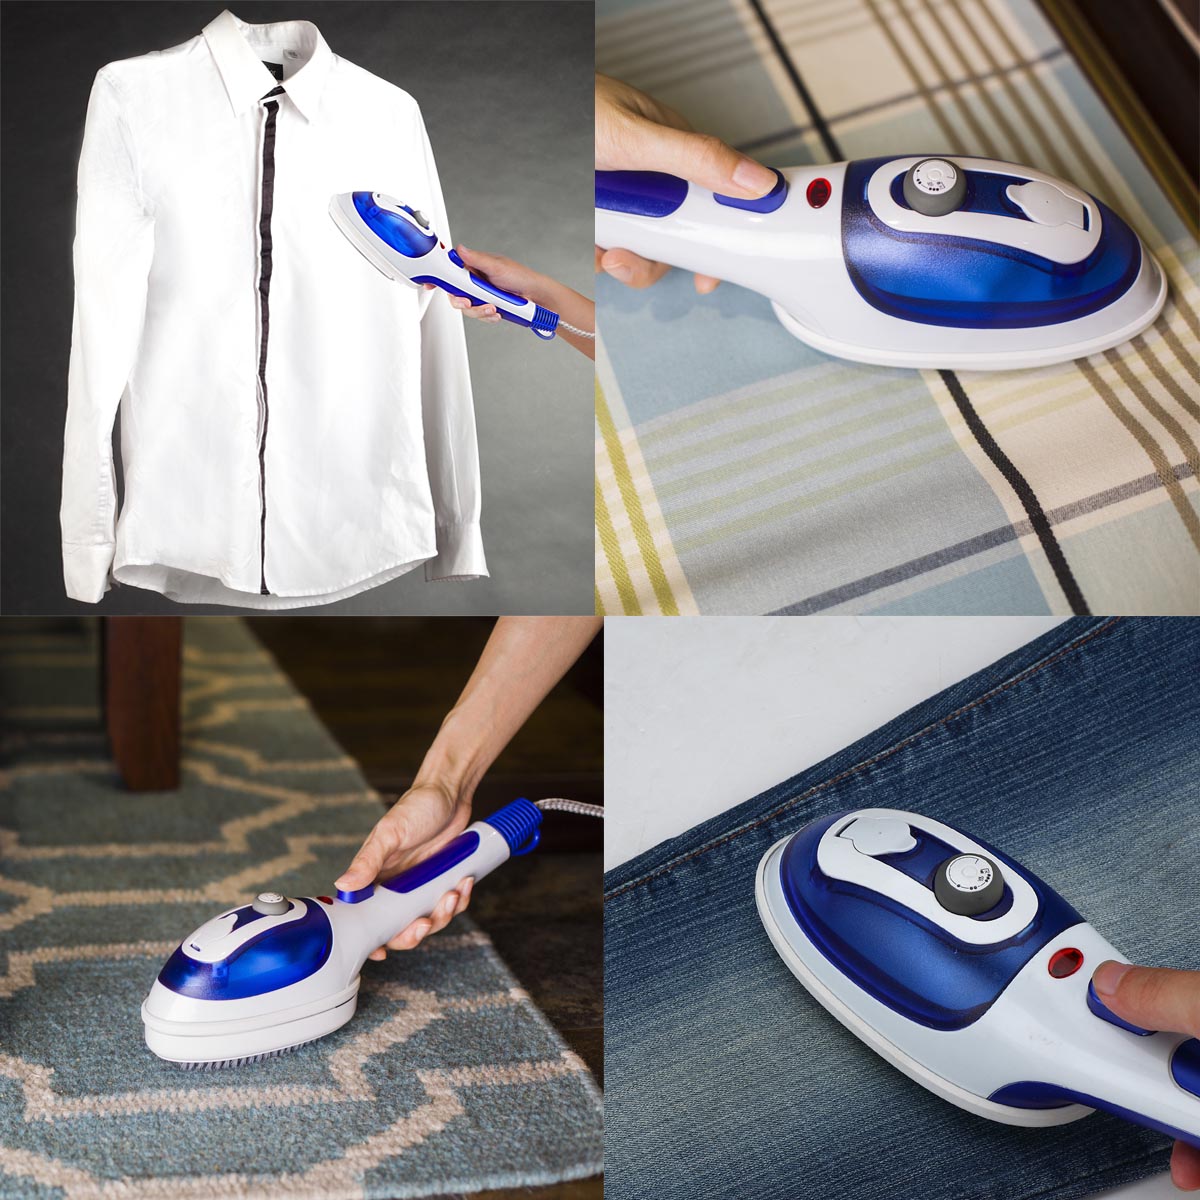 800W-Multifunctional-Iron-Clothes-Fabric-Garment-Steamer-Hand-Held-For-Home-Travel-1816485-10